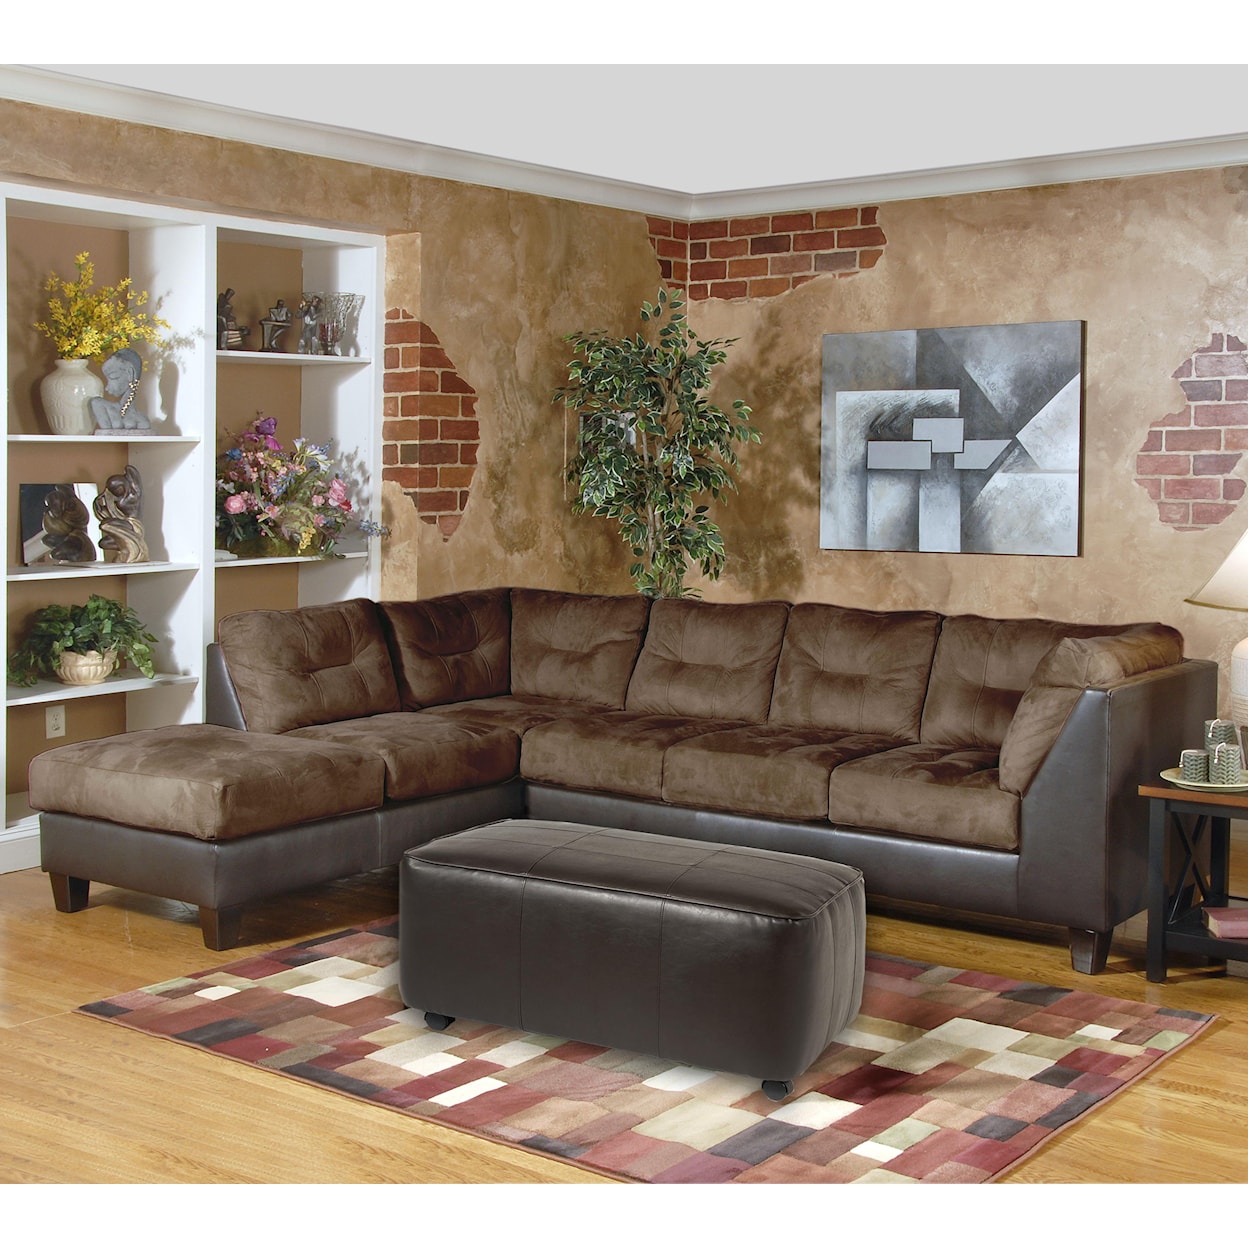 Serta Upholstery by Hughes Furniture 2550 Series Sectional Sofa